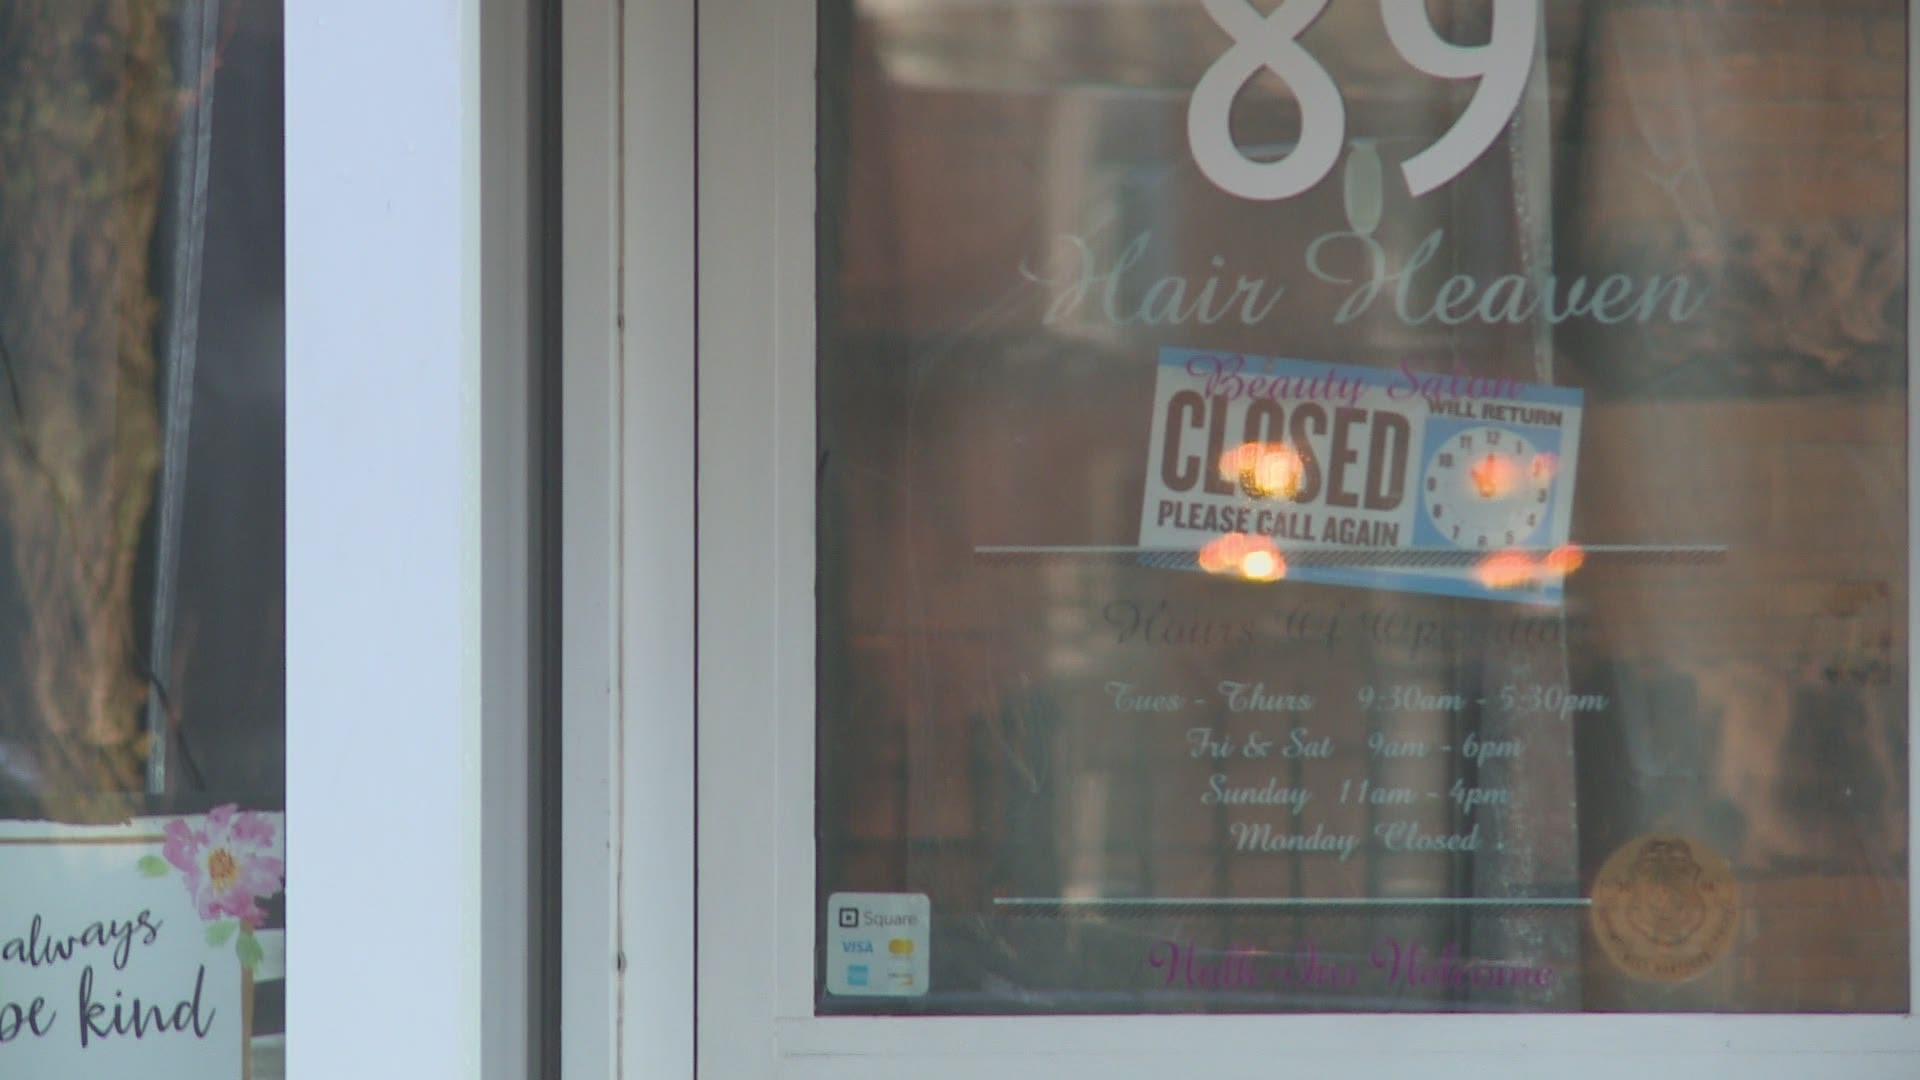 The COVID-19 shutdown is taking its toll on small businesses.